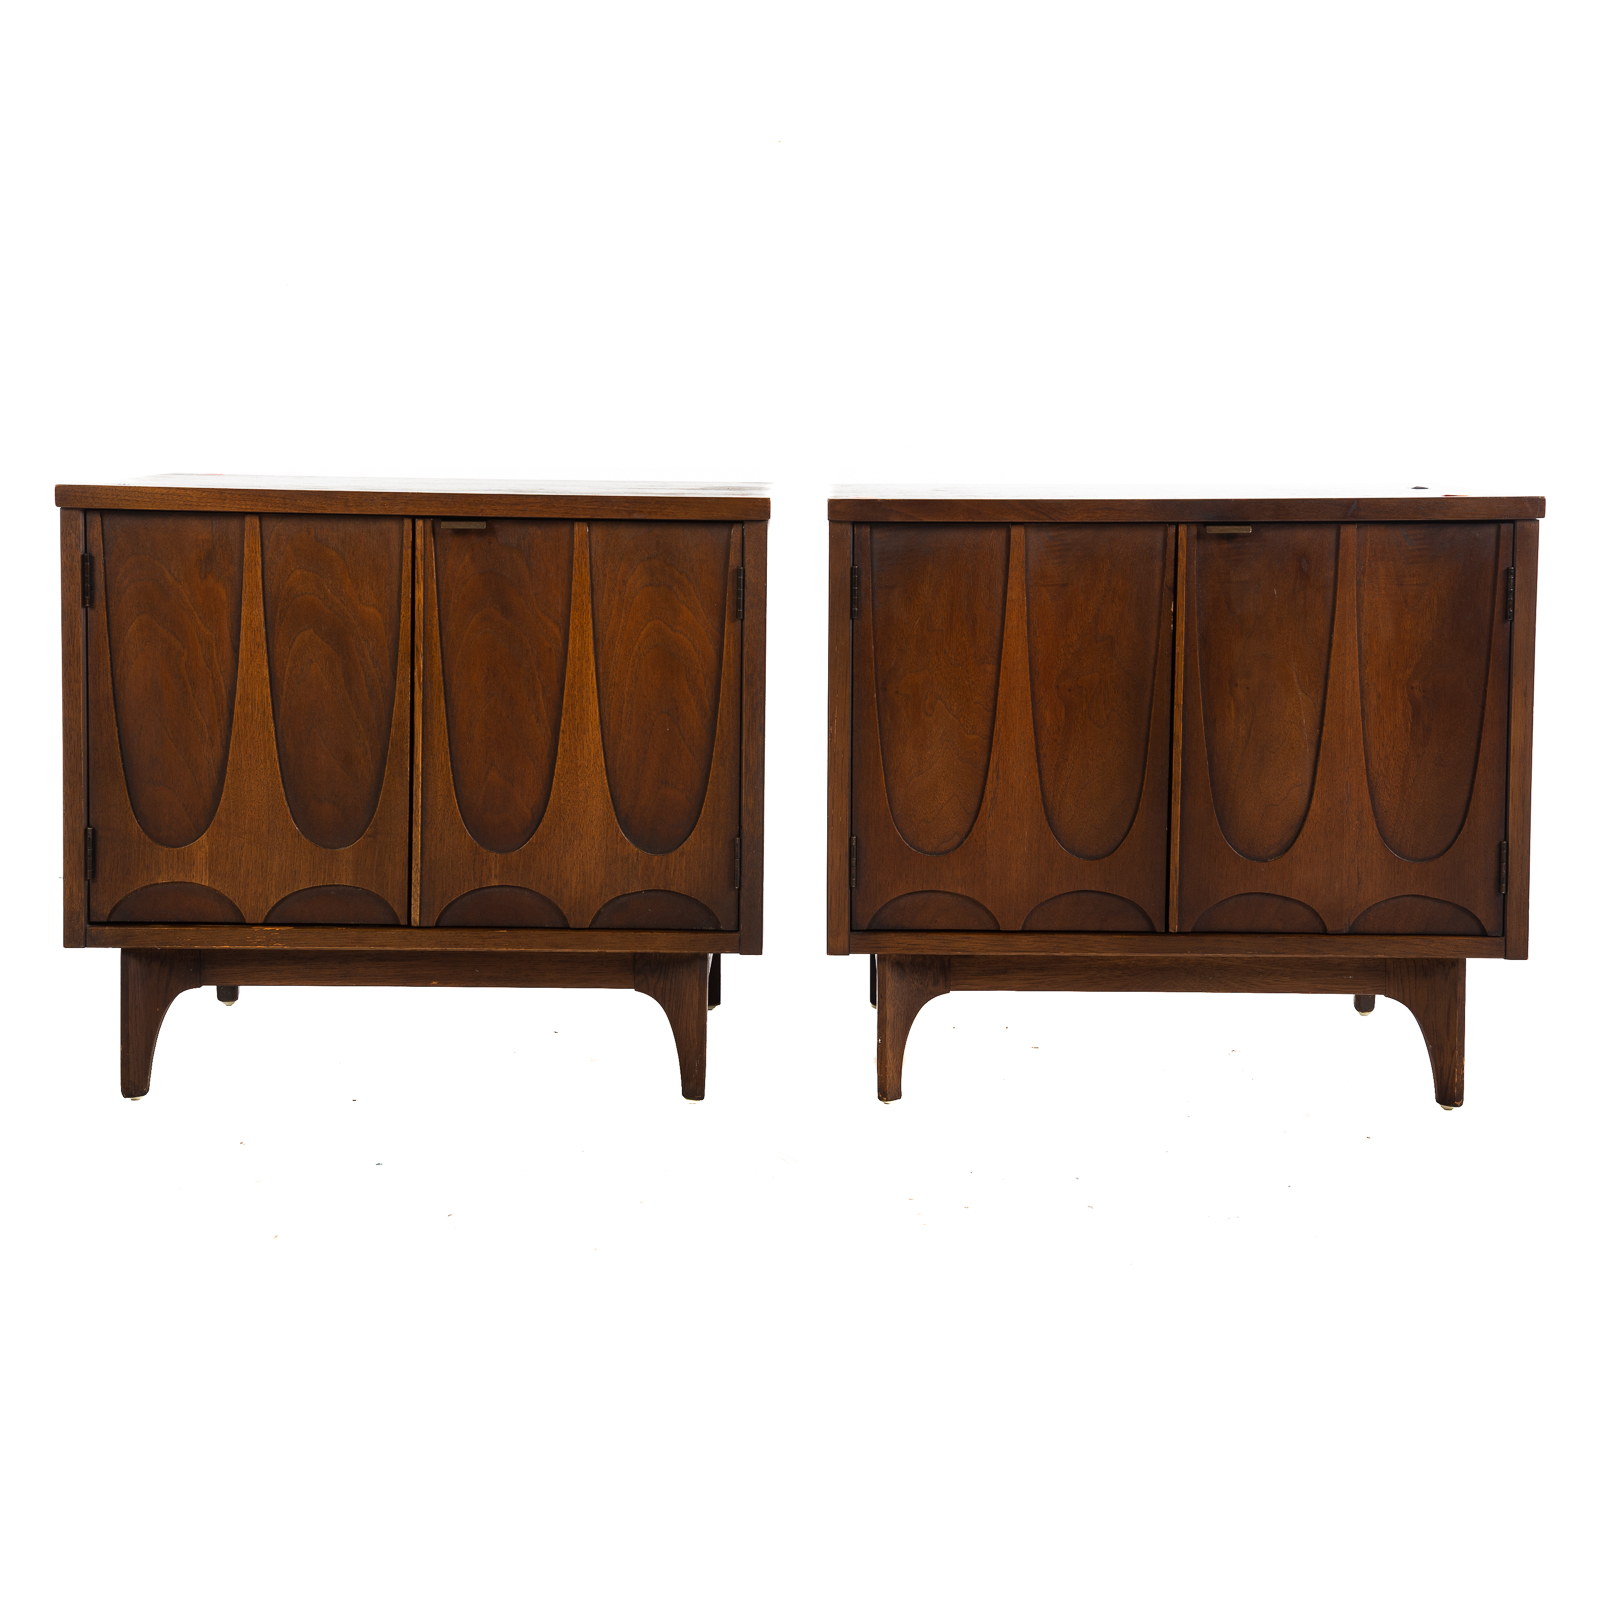 A PAIR OF BROYHILL BRASILIA STANDS 288713